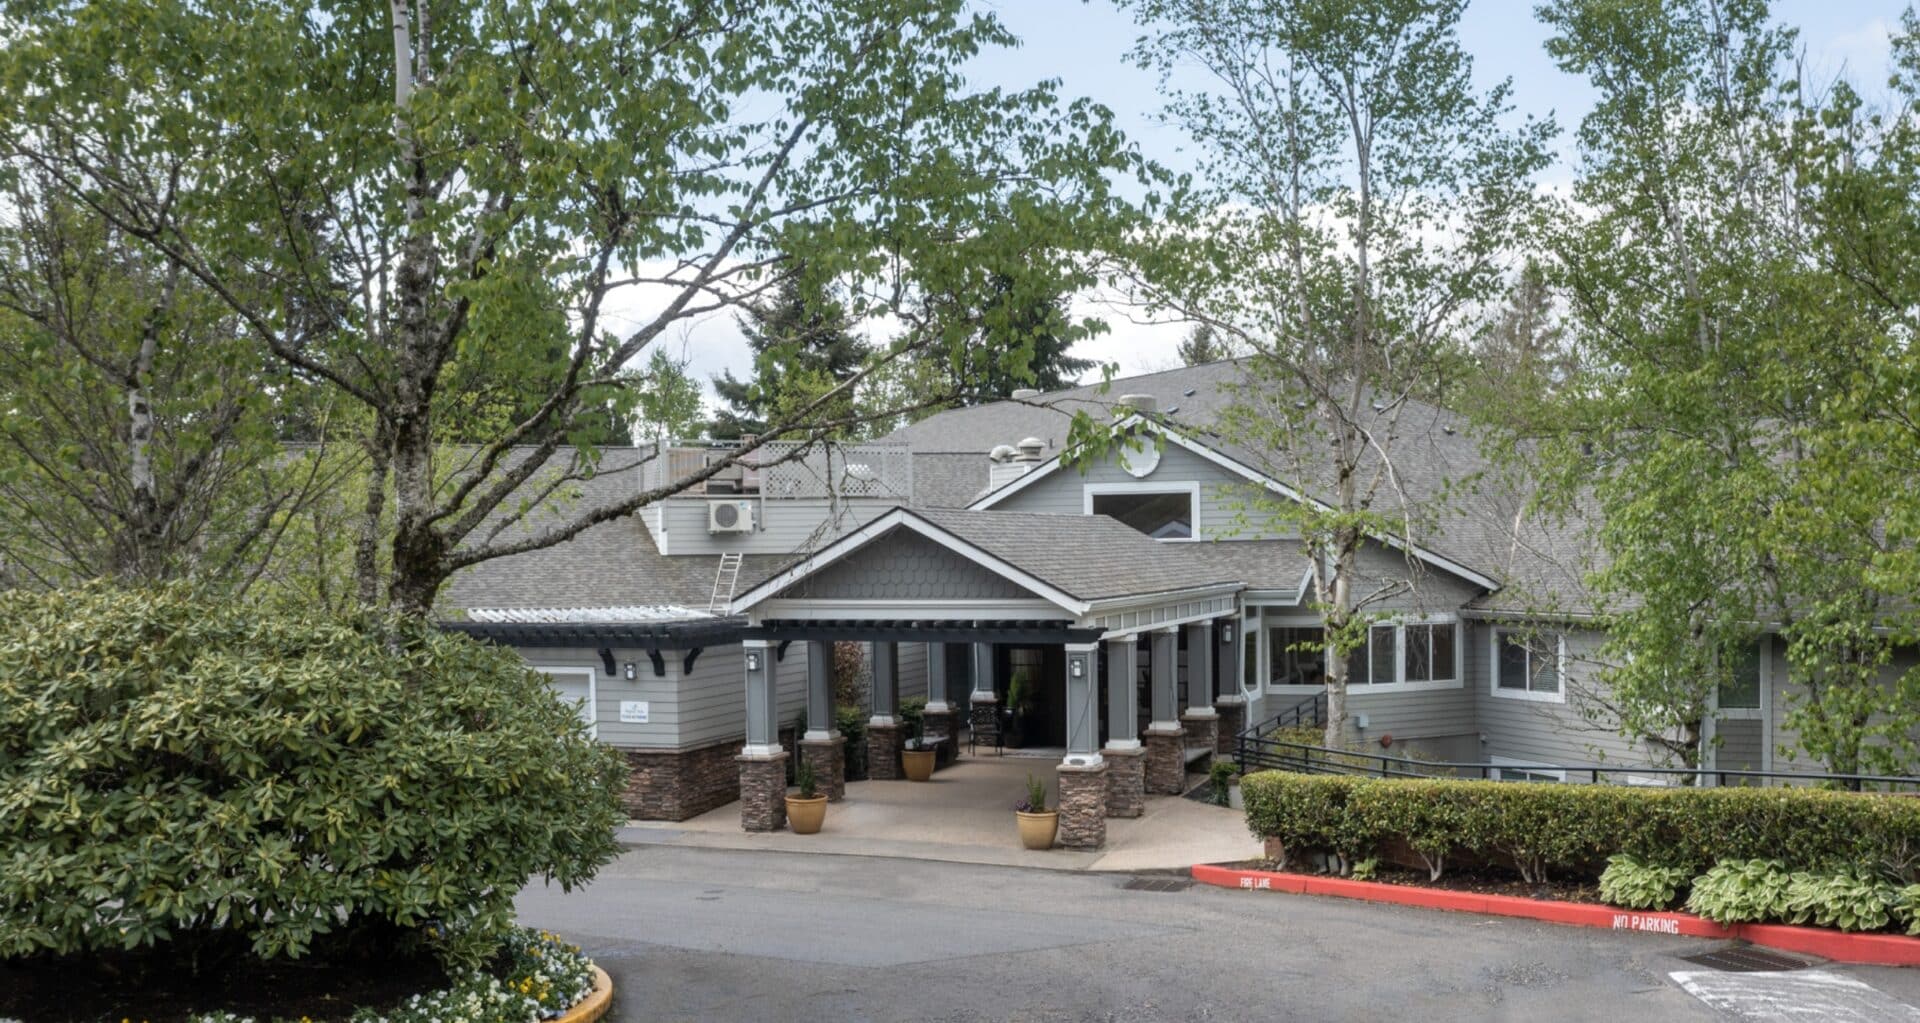 Regency Park Assisted Living and Memory Care, Portland, OR